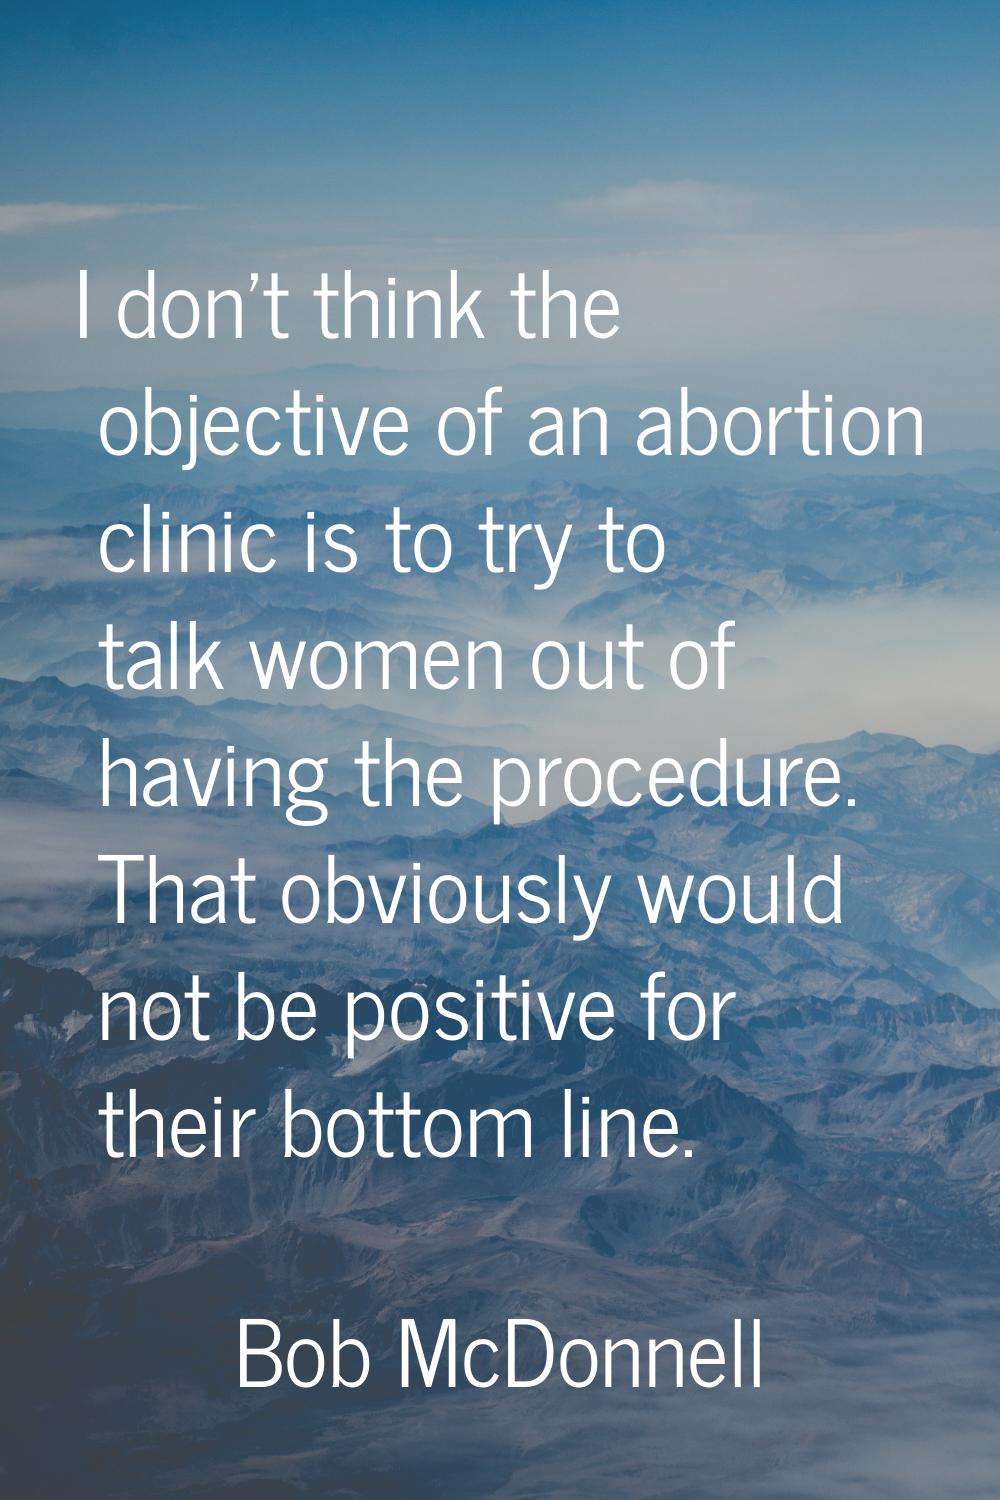 I don't think the objective of an abortion clinic is to try to talk women out of having the procedu